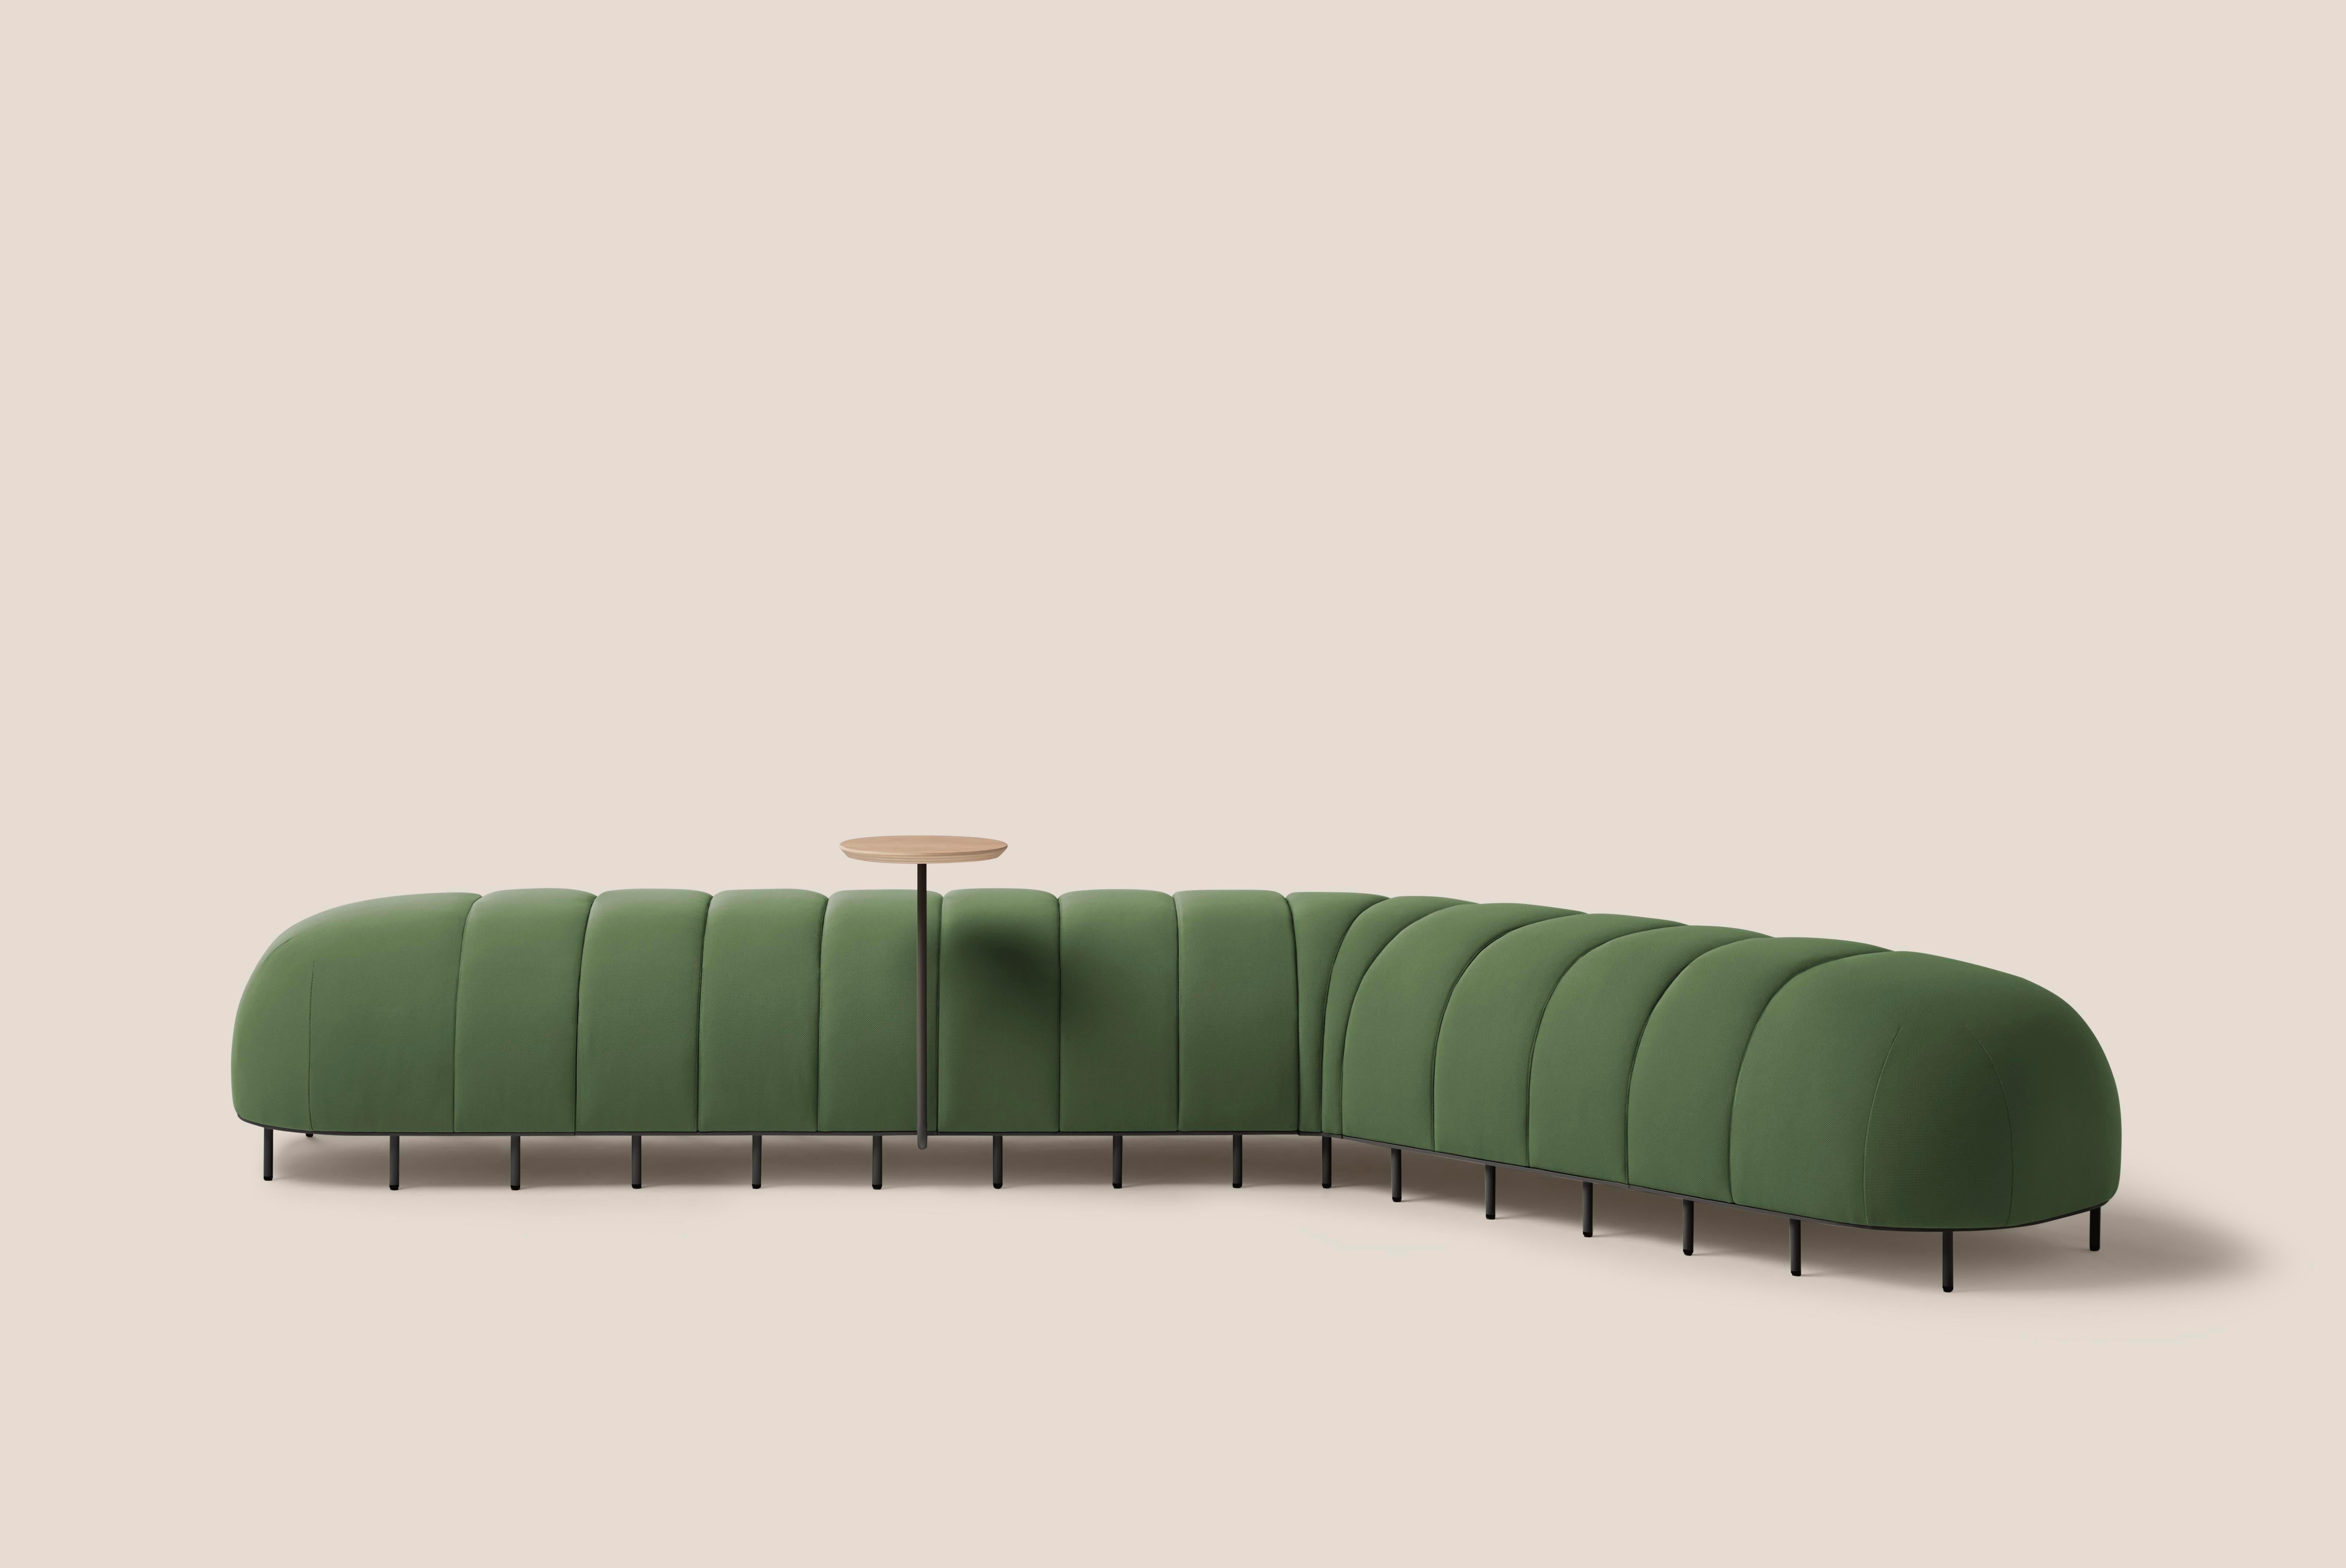 Green Worm bench V by Clap Studio
Dimensions: D 65 x W 280 x H 50 cm
Materials: Plywood, foam CMHR, iron
Available in different colors. Custom modules convinations available

1 x curved module
3 x straight module
2 x end module
1 x side